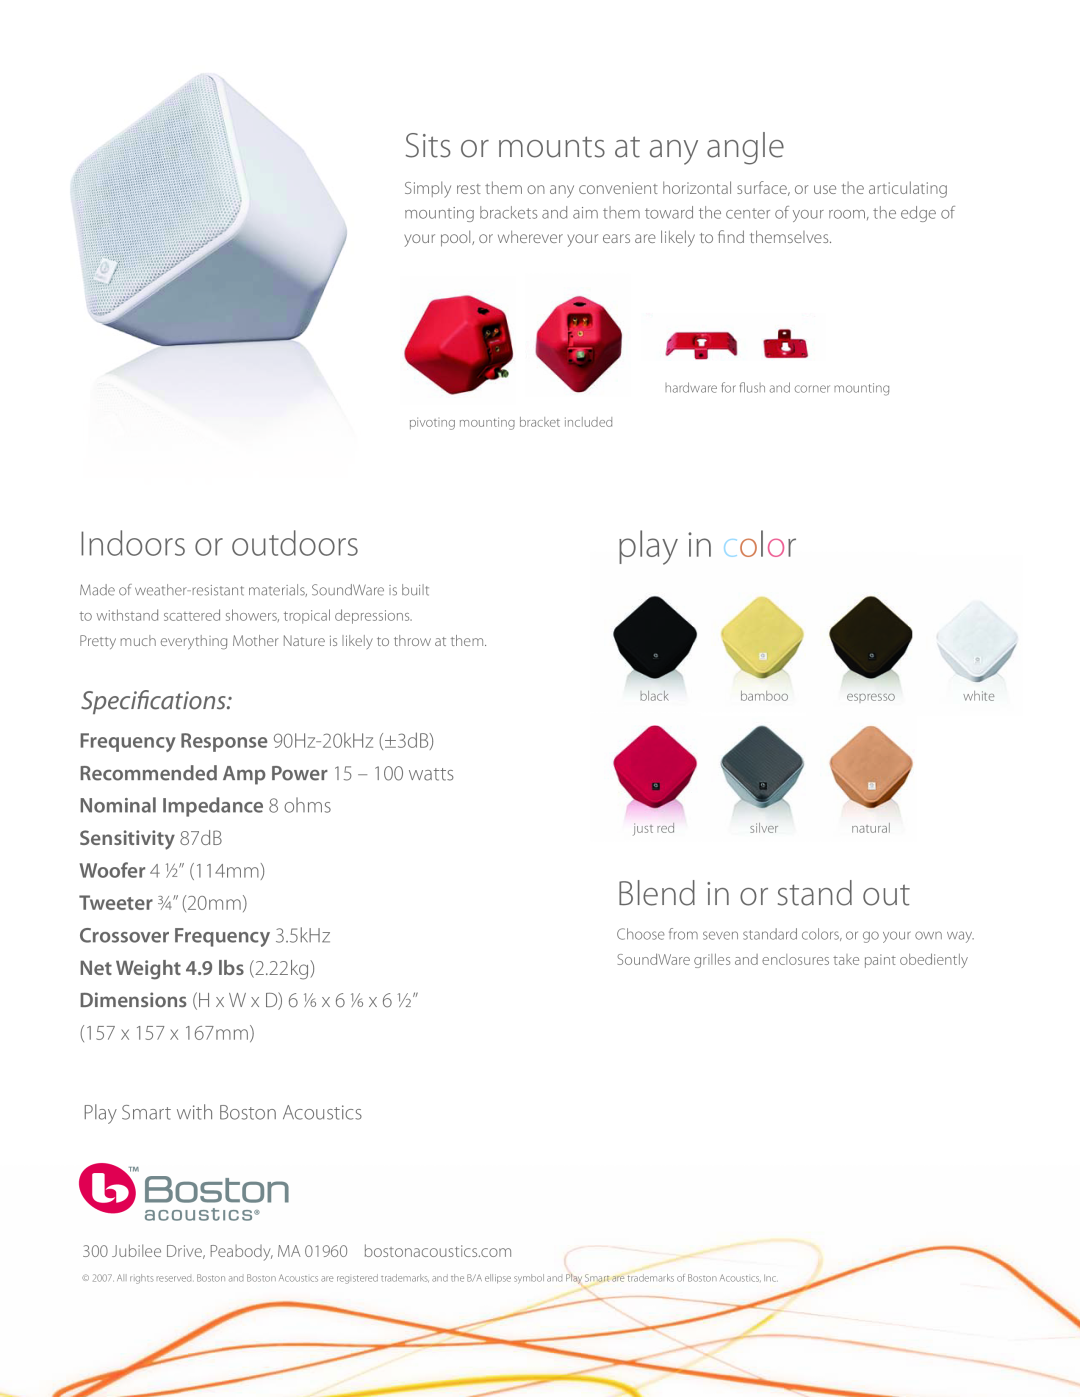 Boston Acoustics SoundWare manual play in color, Sits or mounts at any angle, Indoors or outdoors, Blend in or stand out 